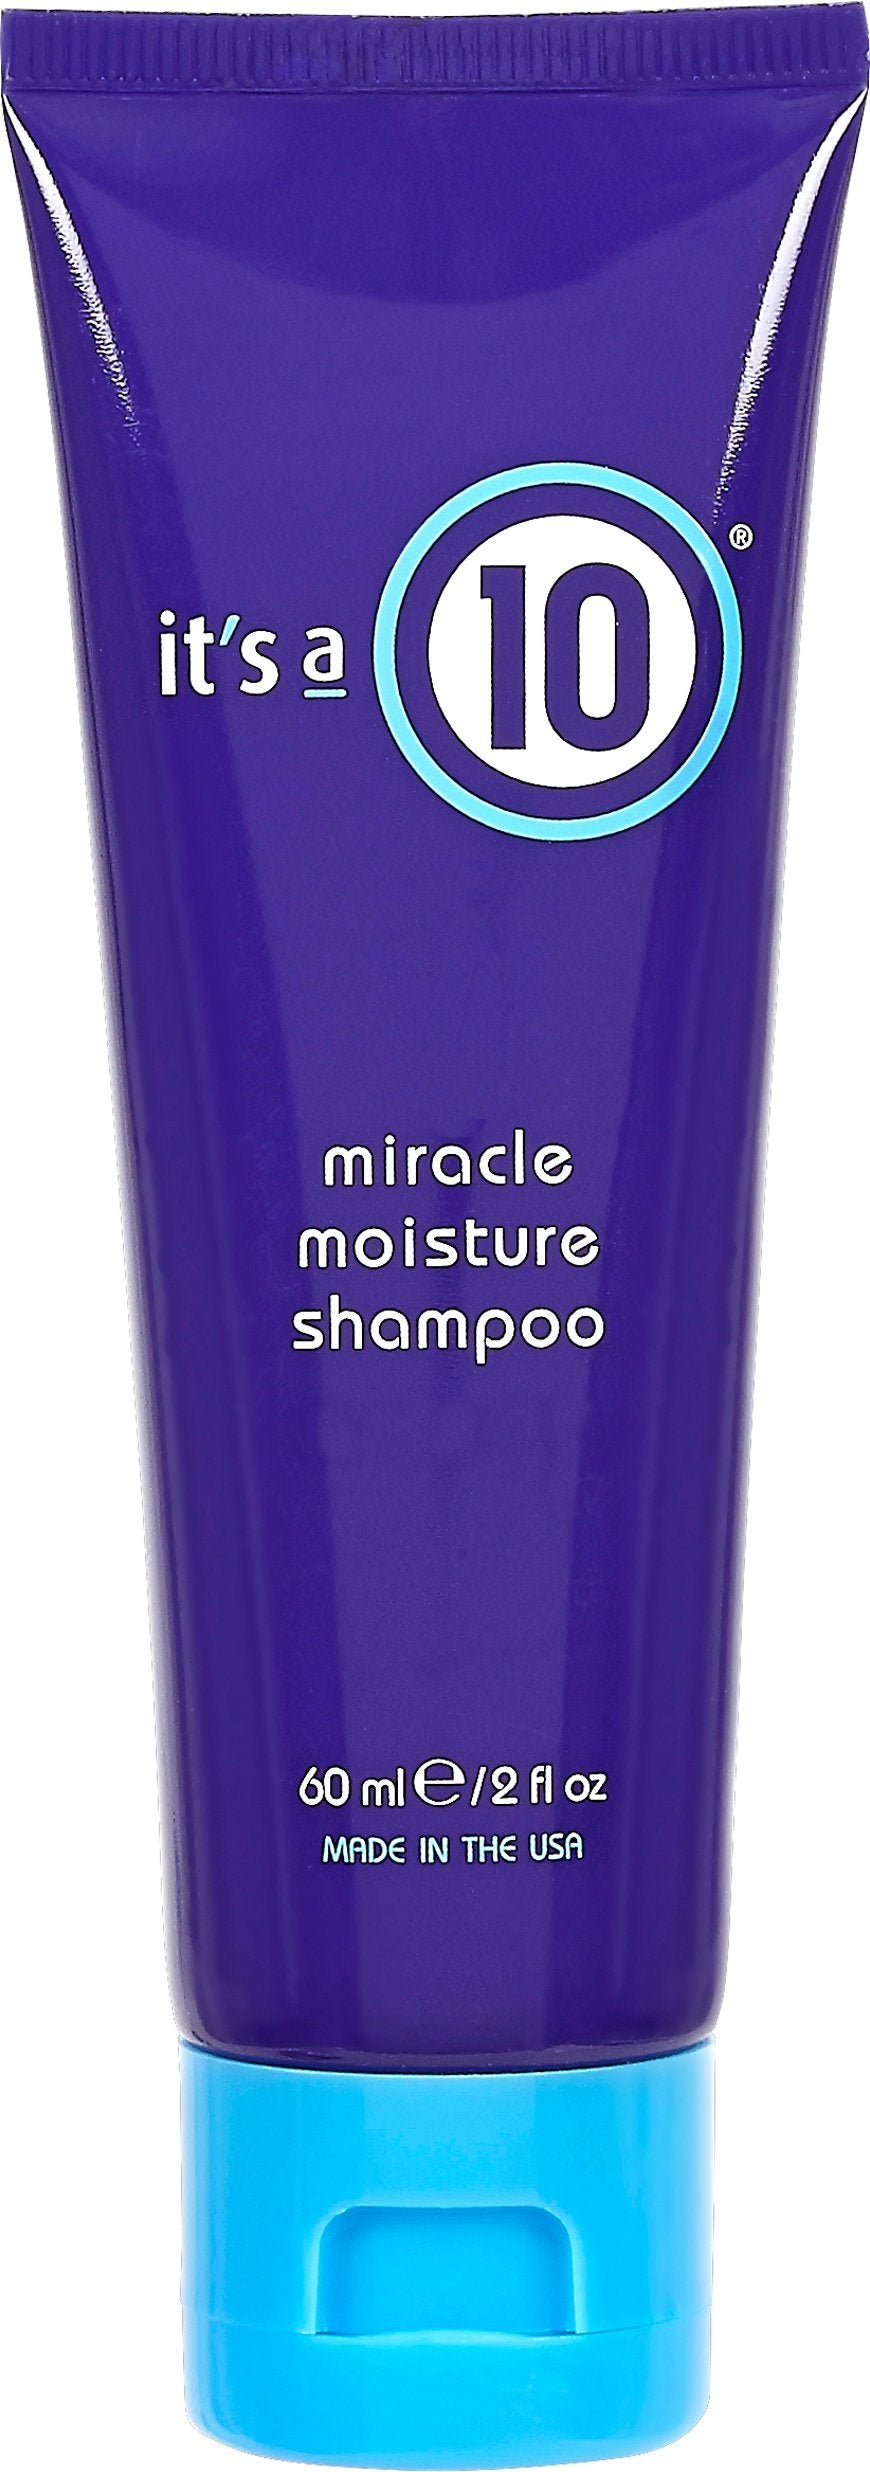 It's a 10 Miracle Moisture Daily Shampoo - 2oz Travel Size